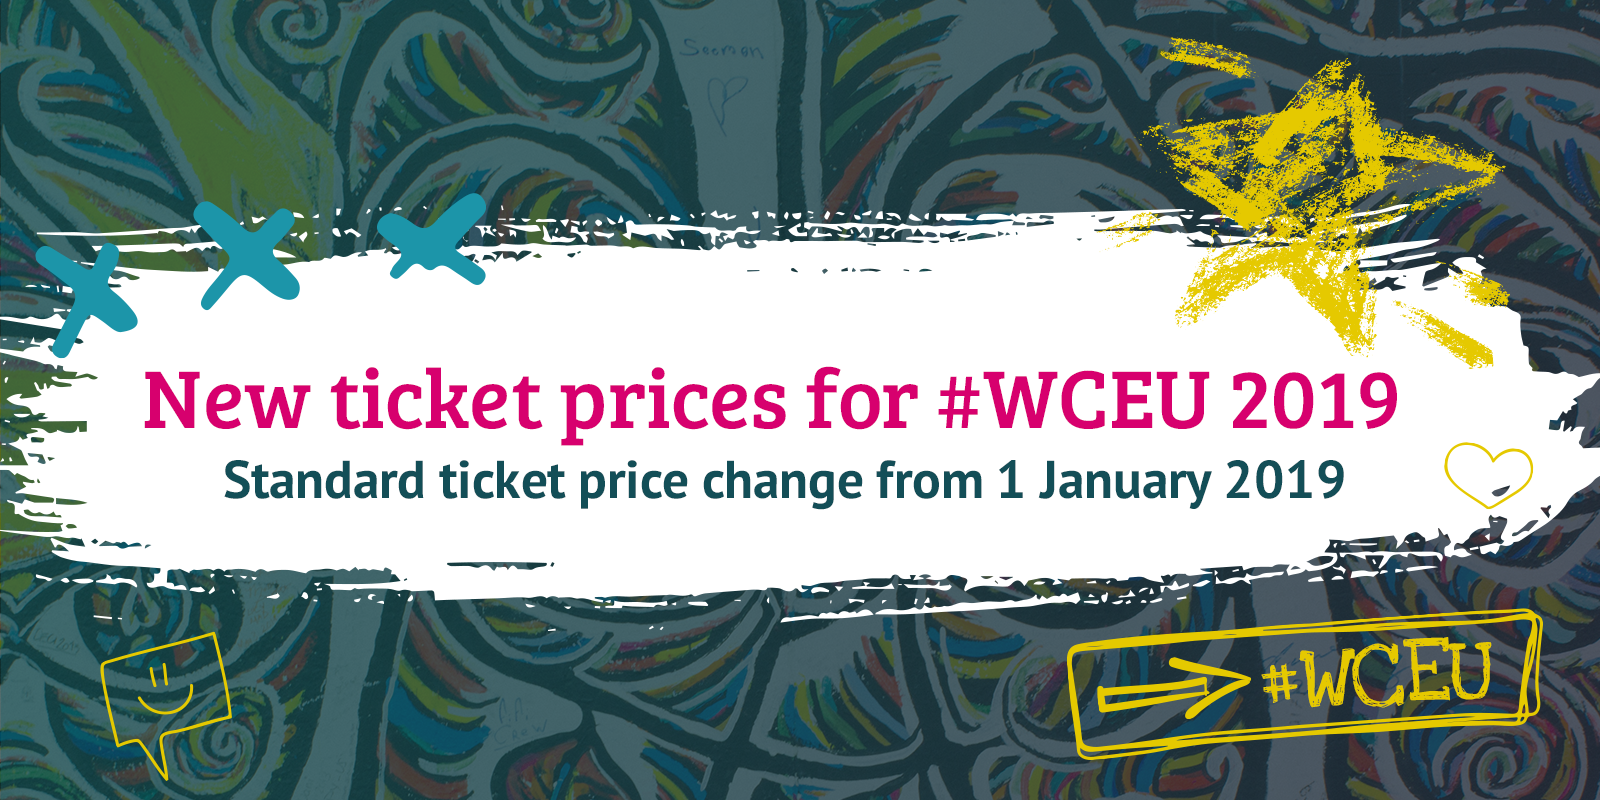 Standard ticket price change for WCEU from 1 Jan 2019